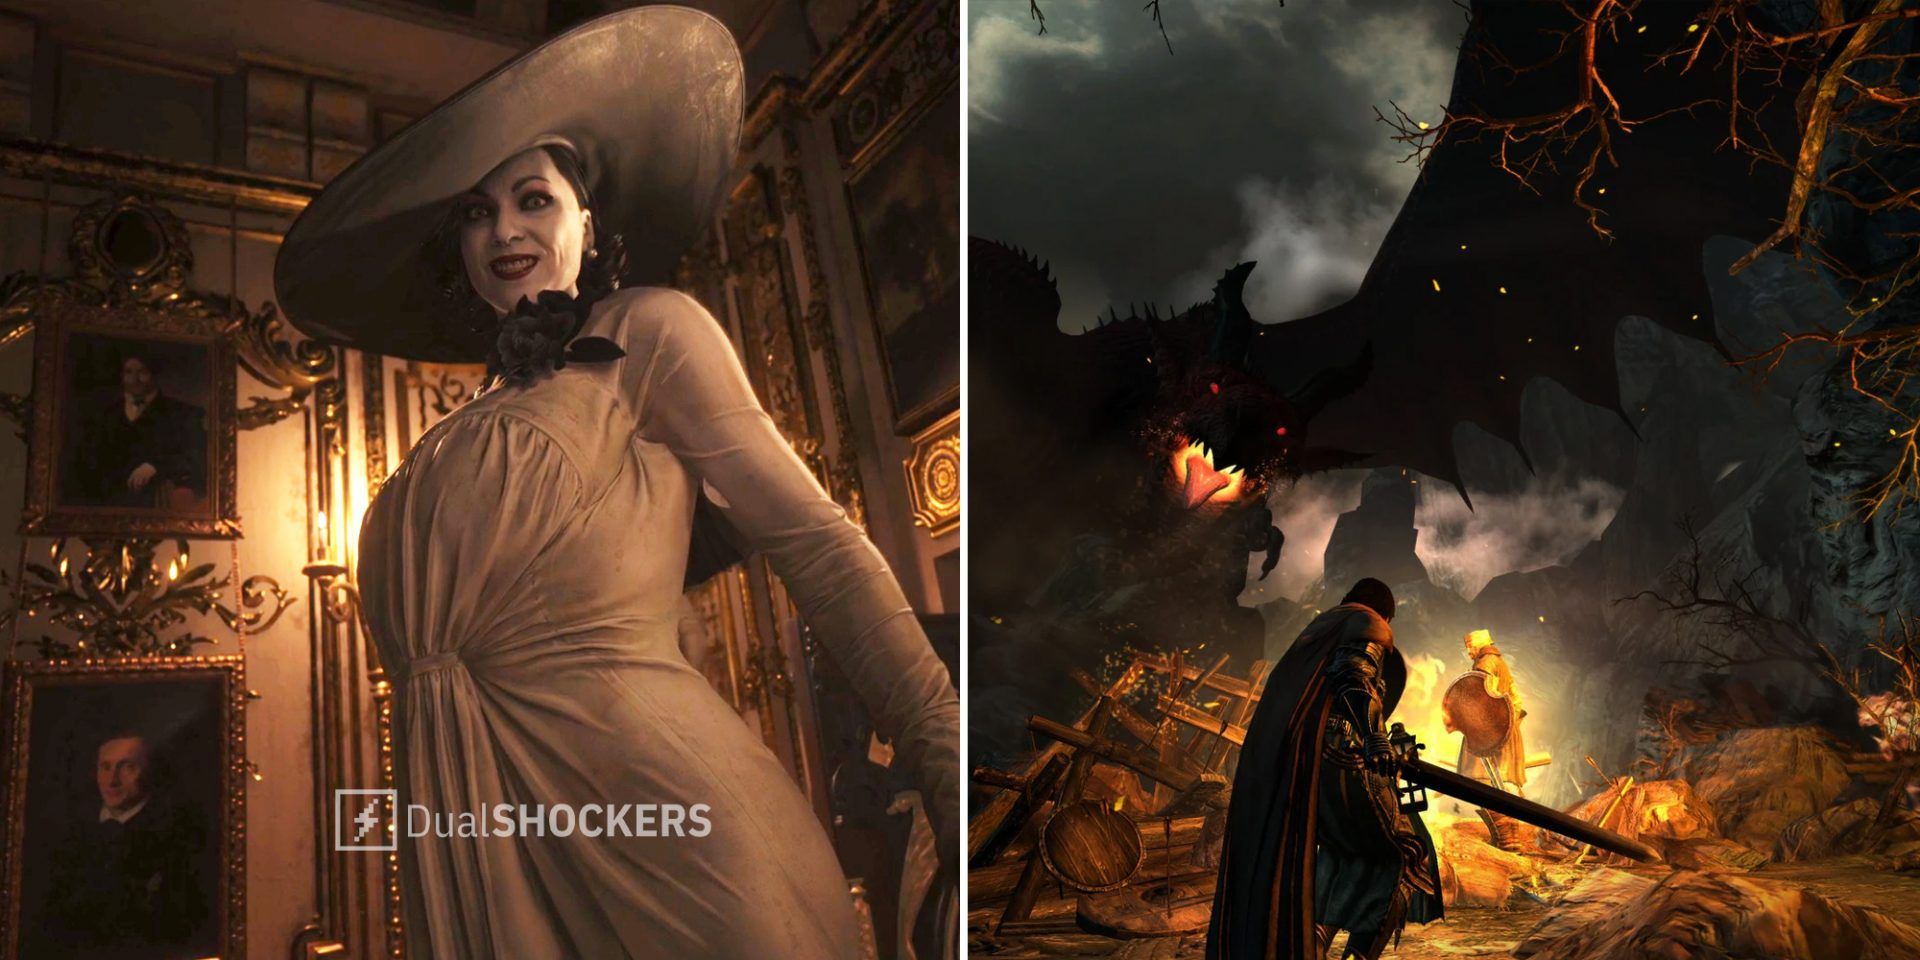 Resident Evil Village Lady Dimitrescu on left, Dragon's Dogma character with sword facing a dragon on right